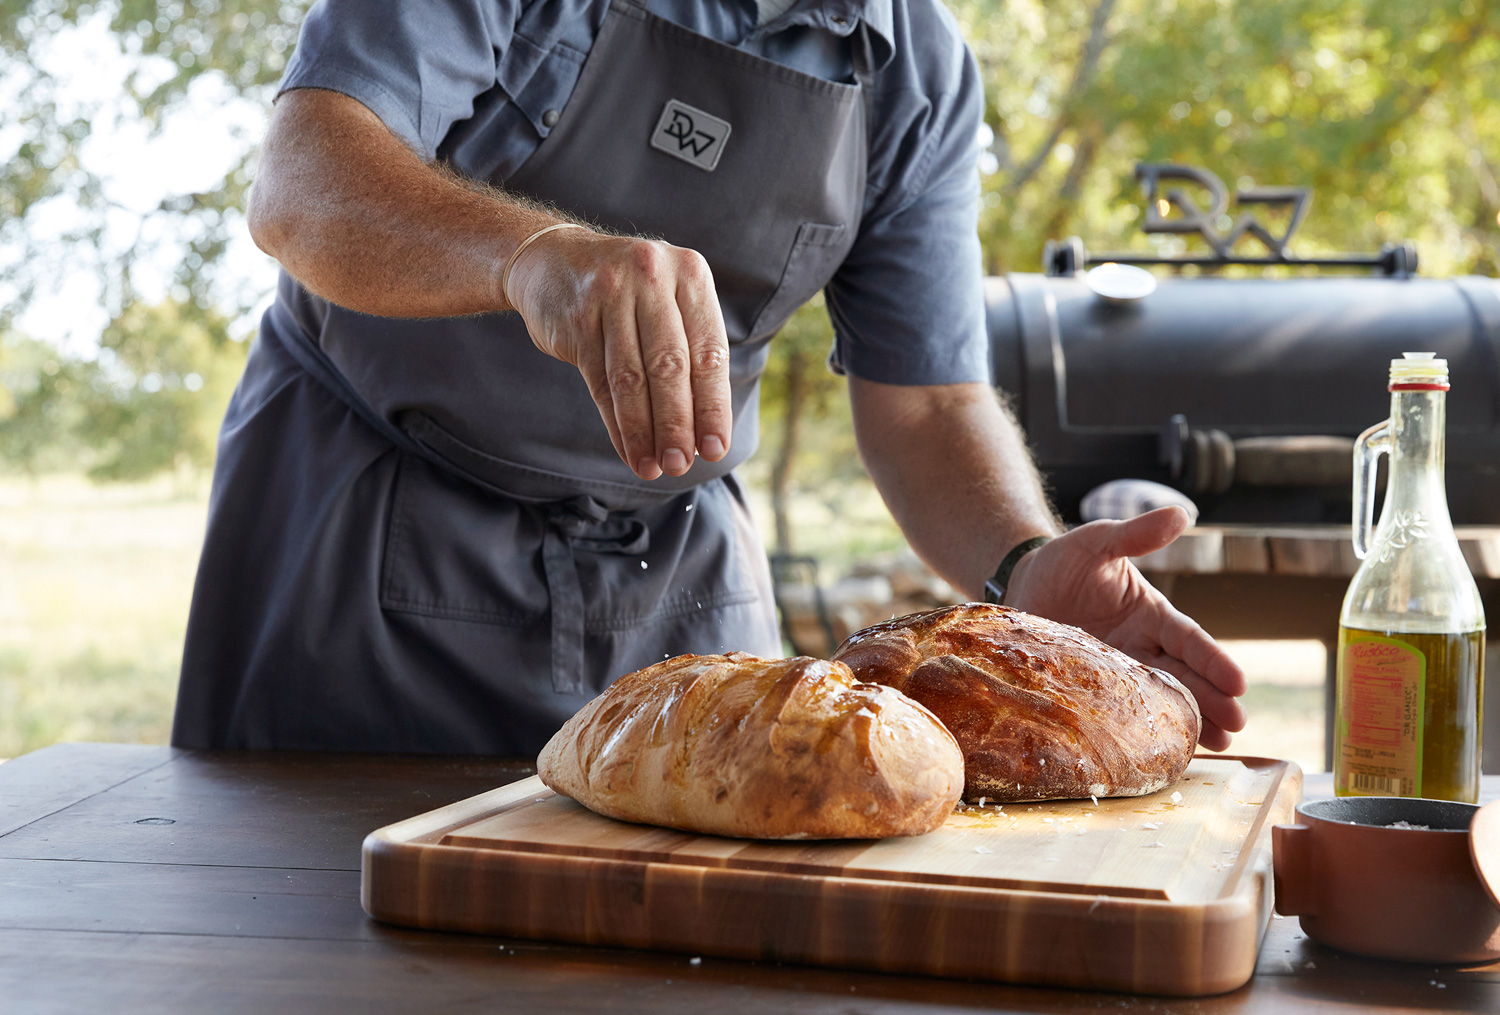 Chef making bread at outdoor oven in Texas by lifestyle photographer Buff Strickland